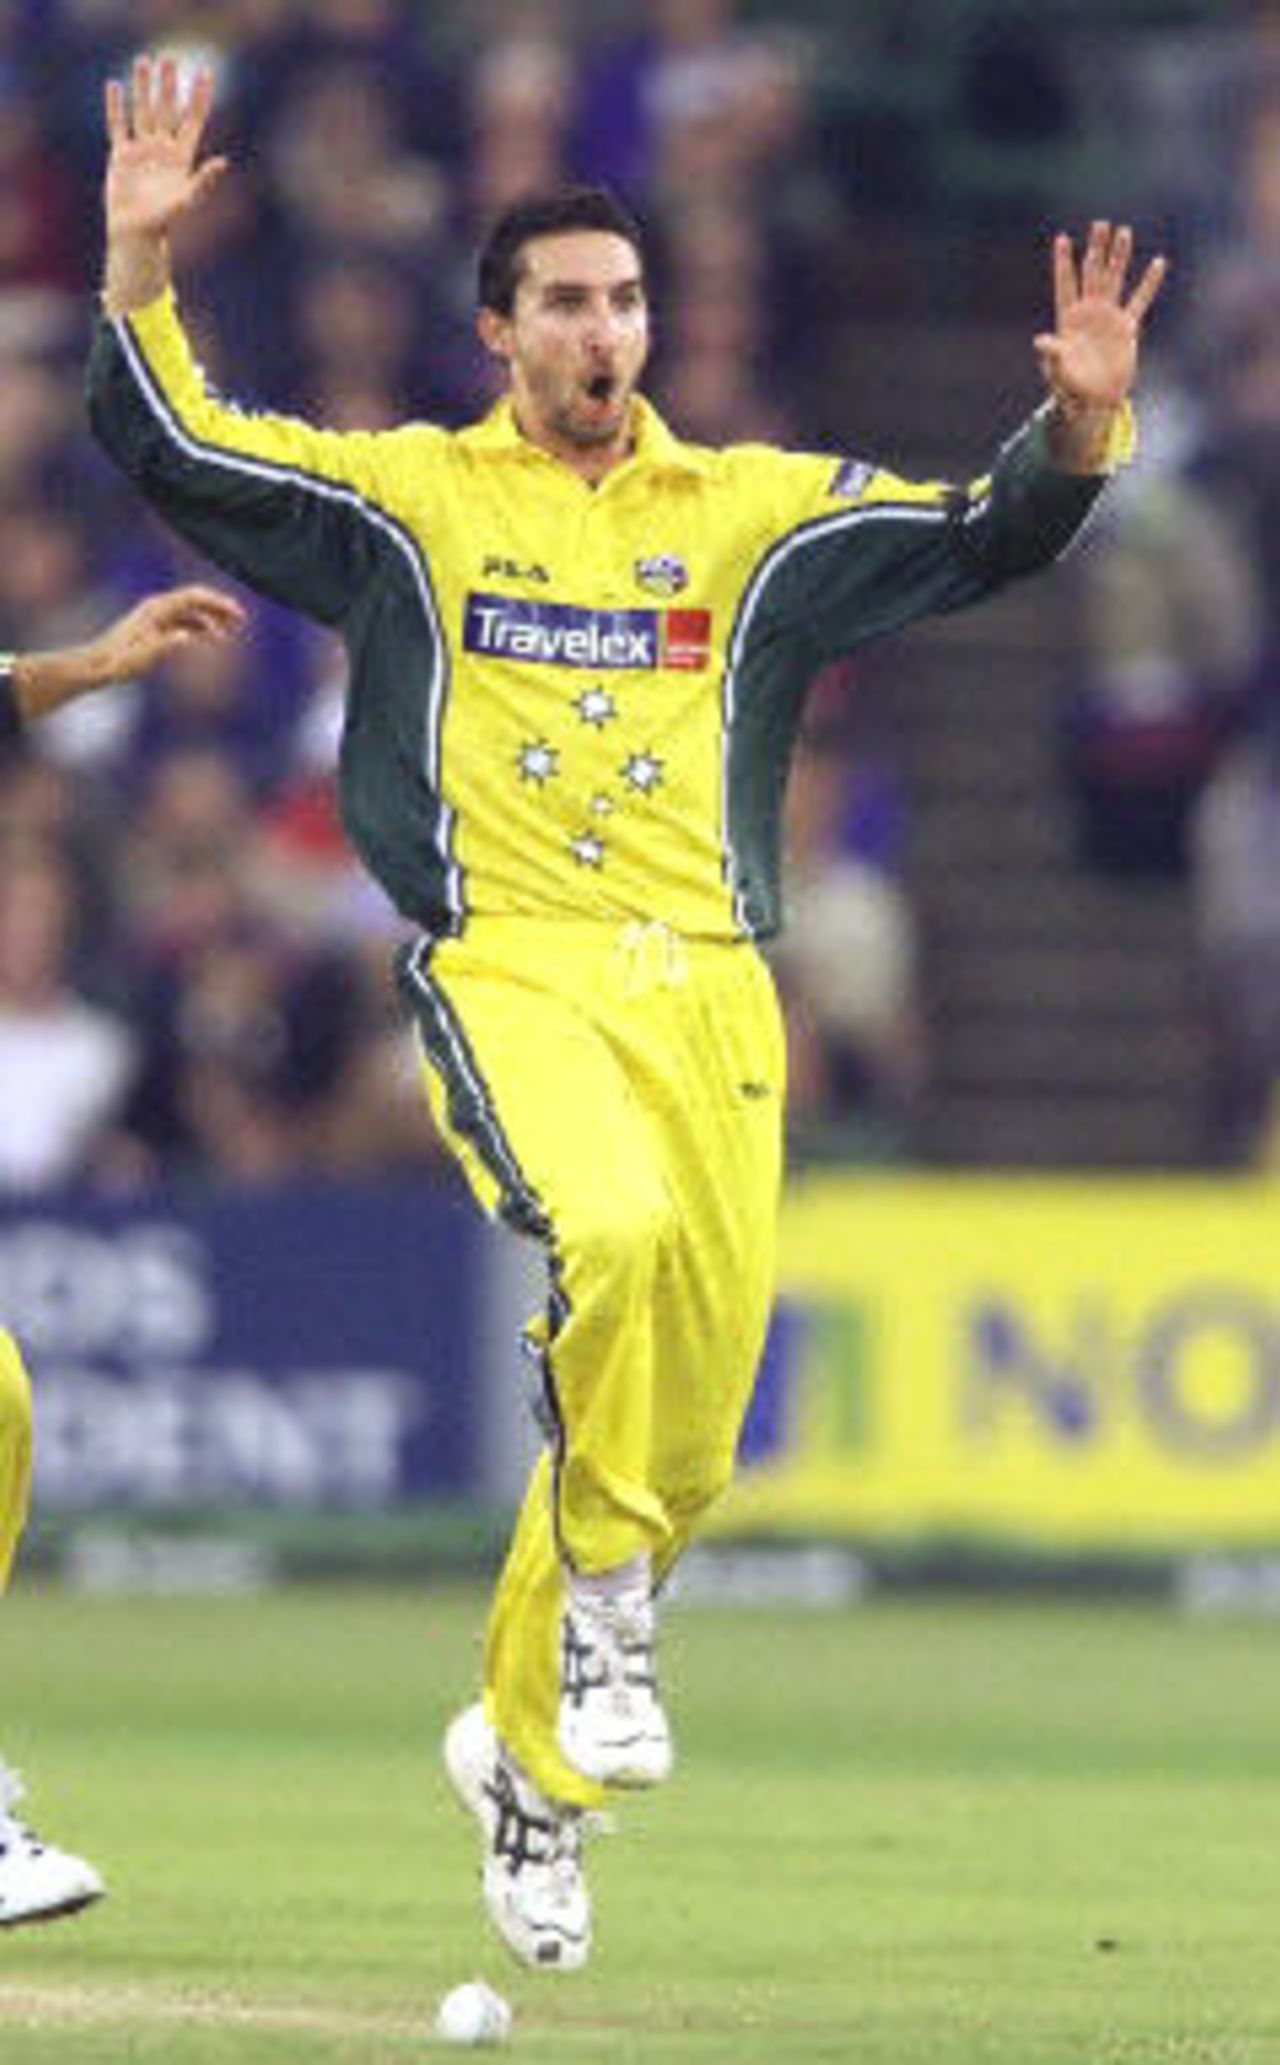 Jason Gillespie celebrates taking the wicket of Michael Vaughan, 5th ODI at Old Trafford,14 June 2001.